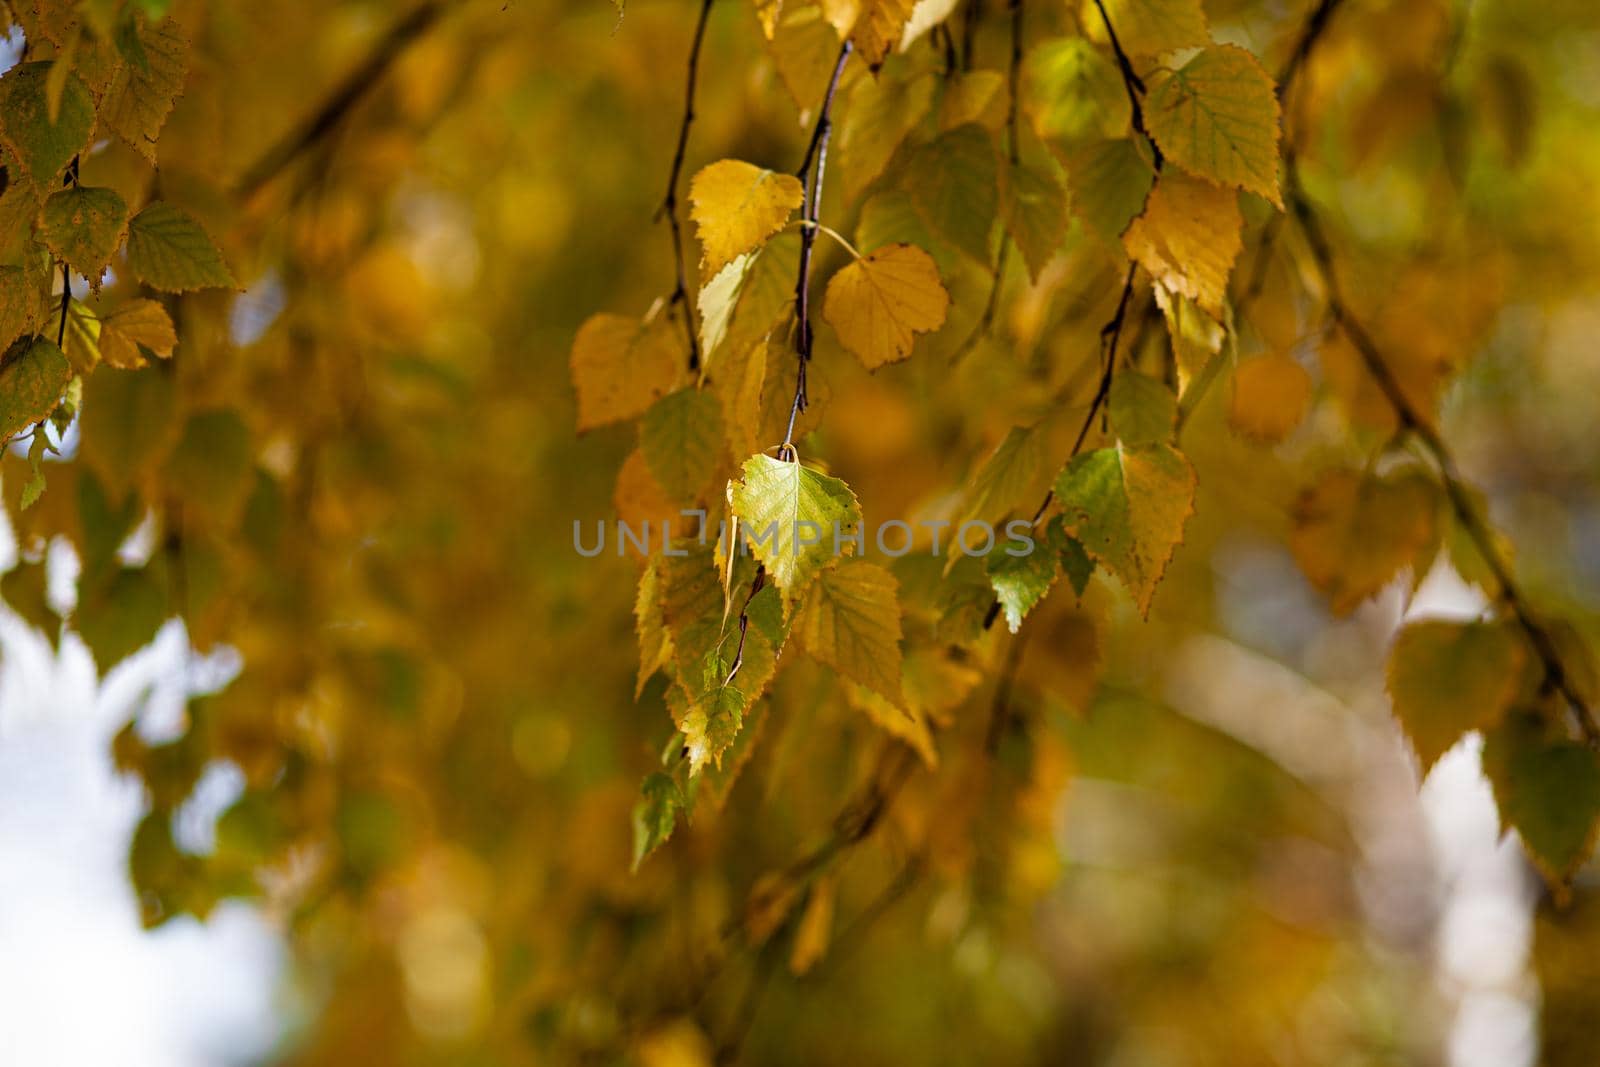 Yellow or dry leaves on tree branches in autumn. Leaves of birch, linden and other trees on the branches. There is an empty space for the text